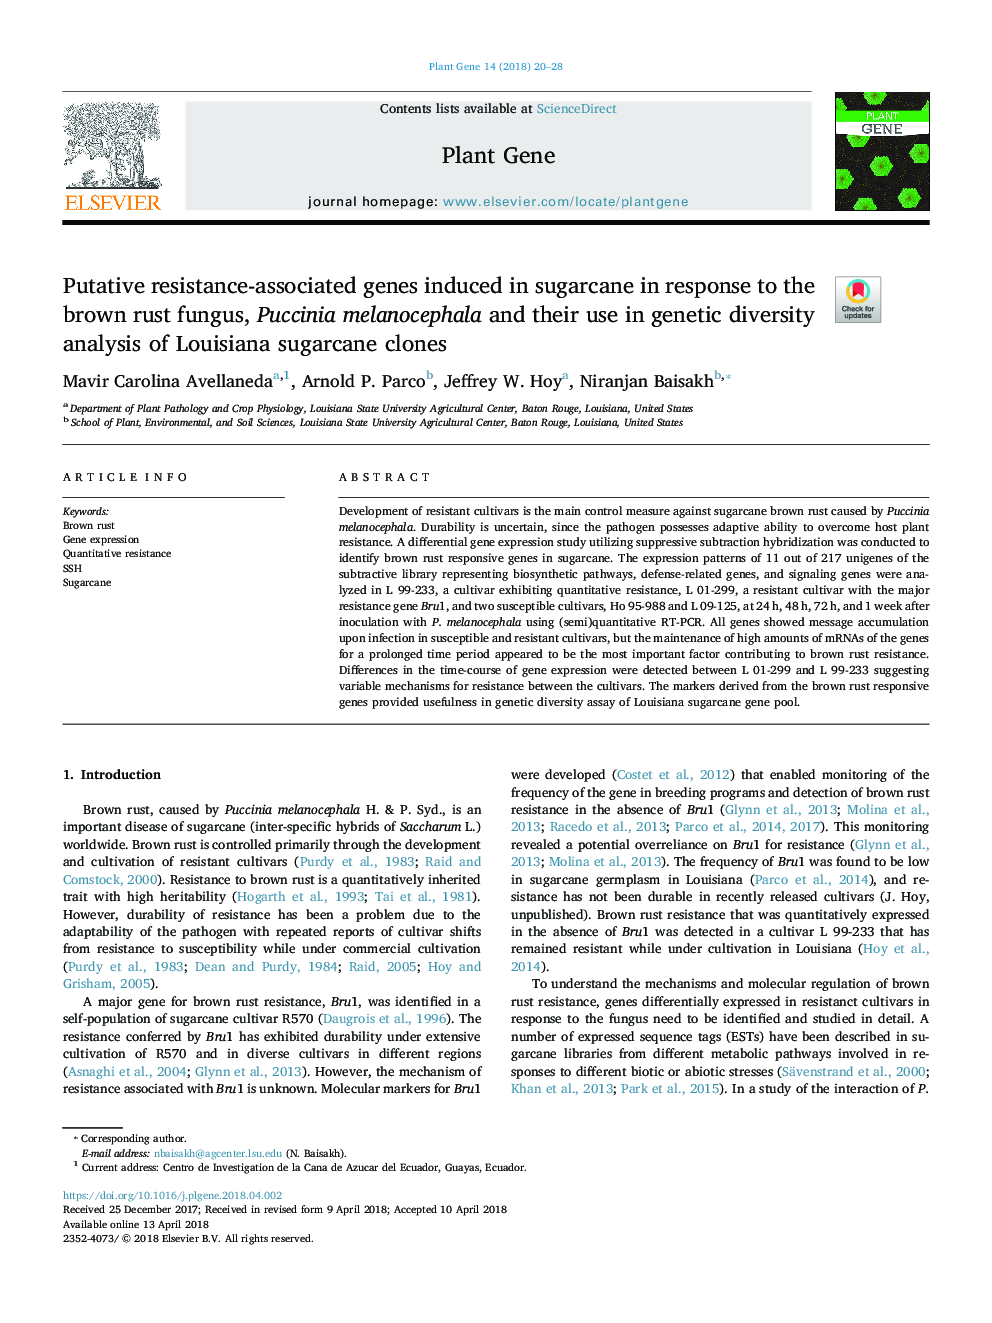 Putative resistance-associated genes induced in sugarcane in response to the brown rust fungus, Puccinia melanocephala and their use in genetic diversity analysis of Louisiana sugarcane clones